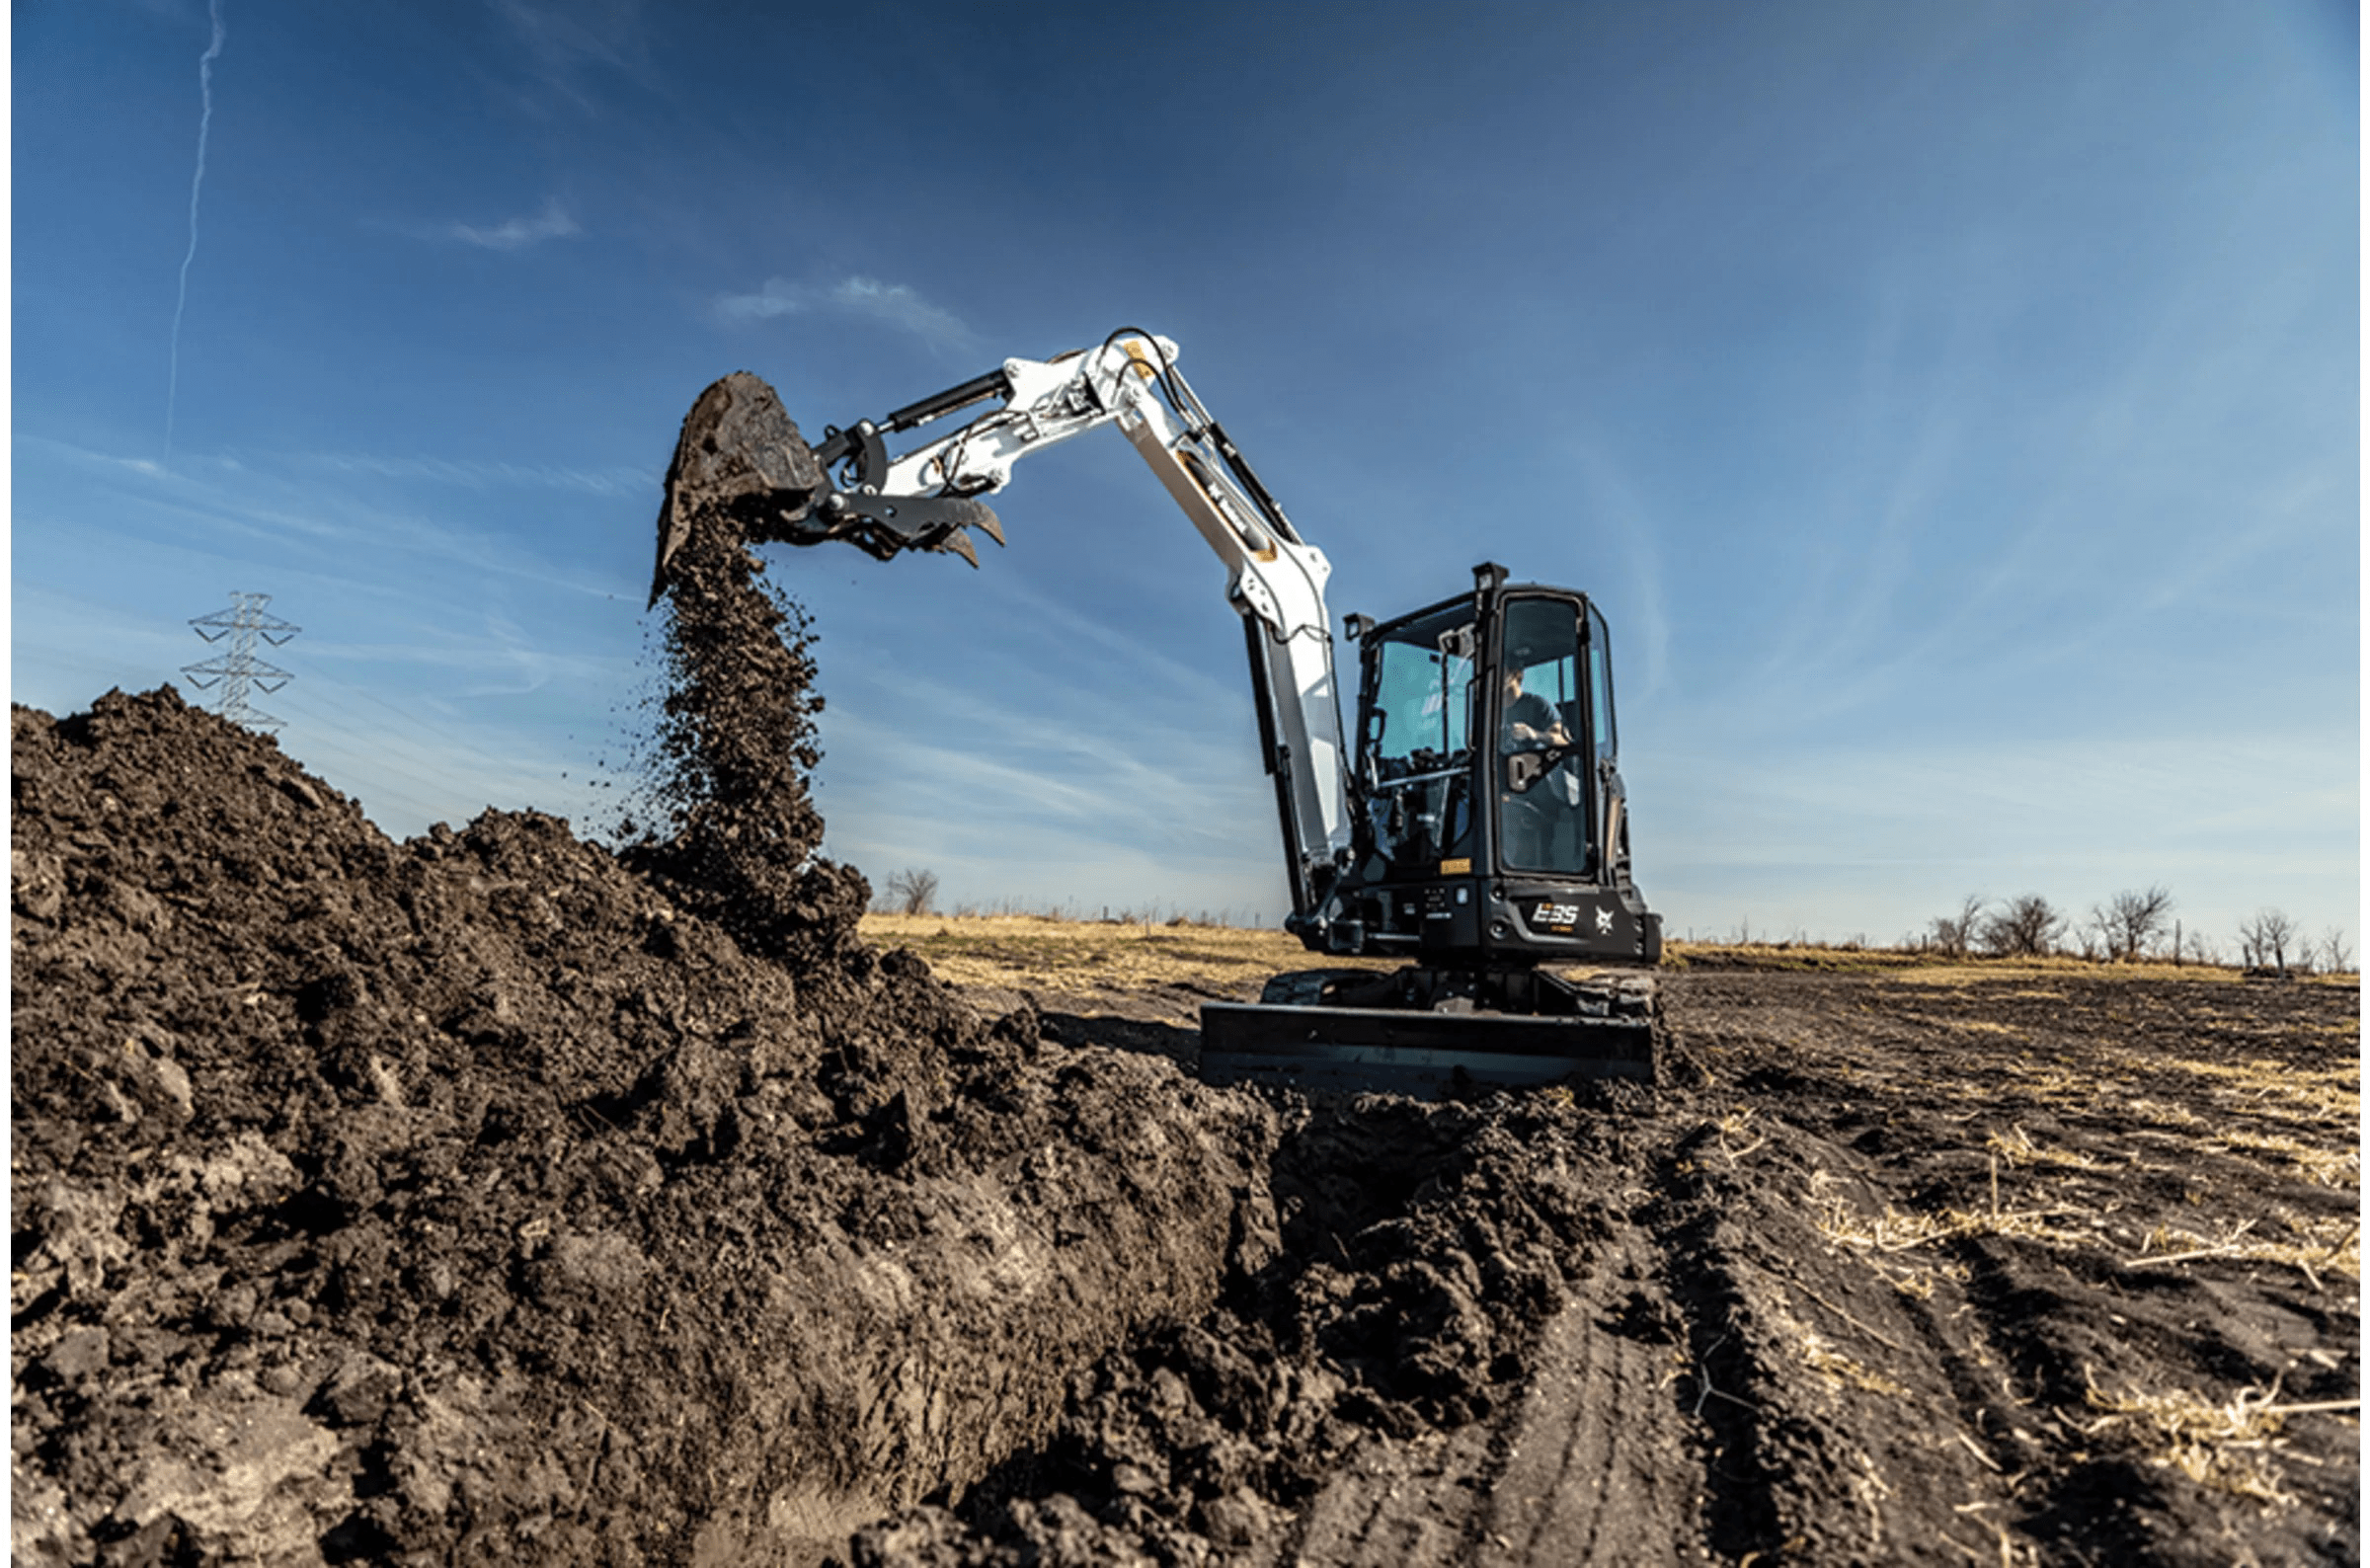 Excavating contractor operating heavy machinery on a construction site.